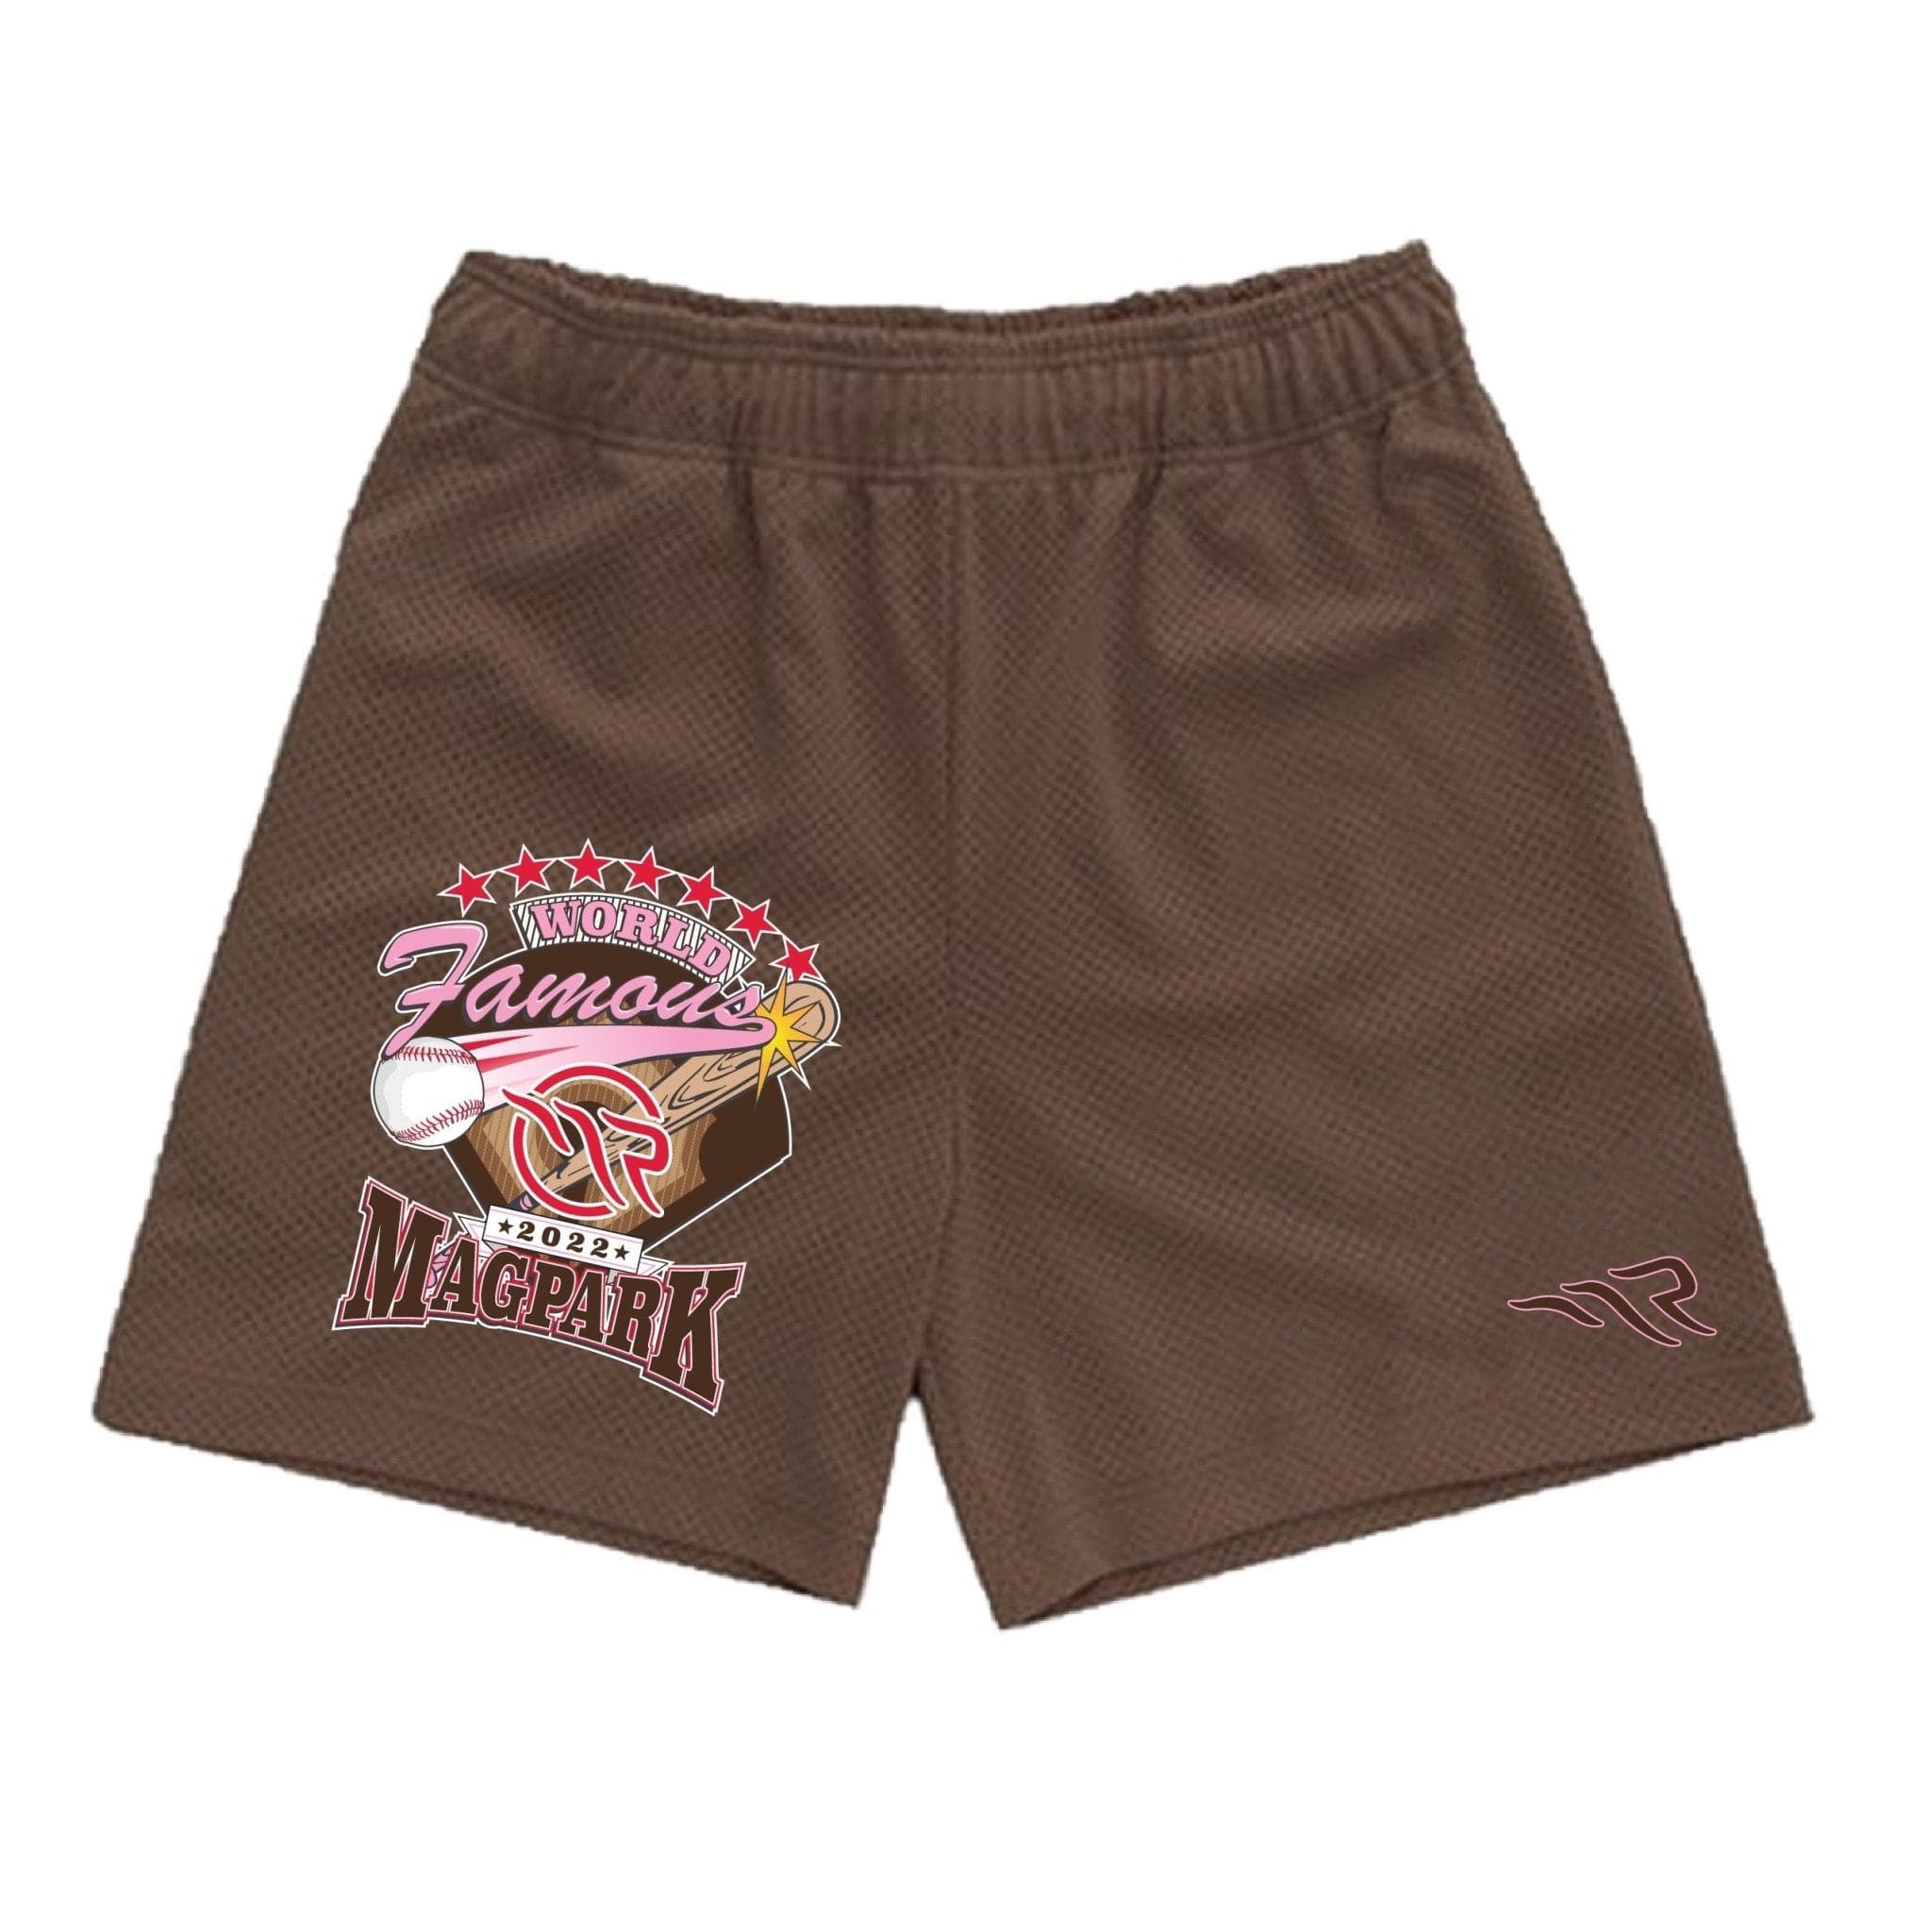 THE MAGNOLIA PARK - WORLD FAMOUS 7 YEAR ANNIVERSARY MESH SHORT (BROWN) - The Magnolia Park